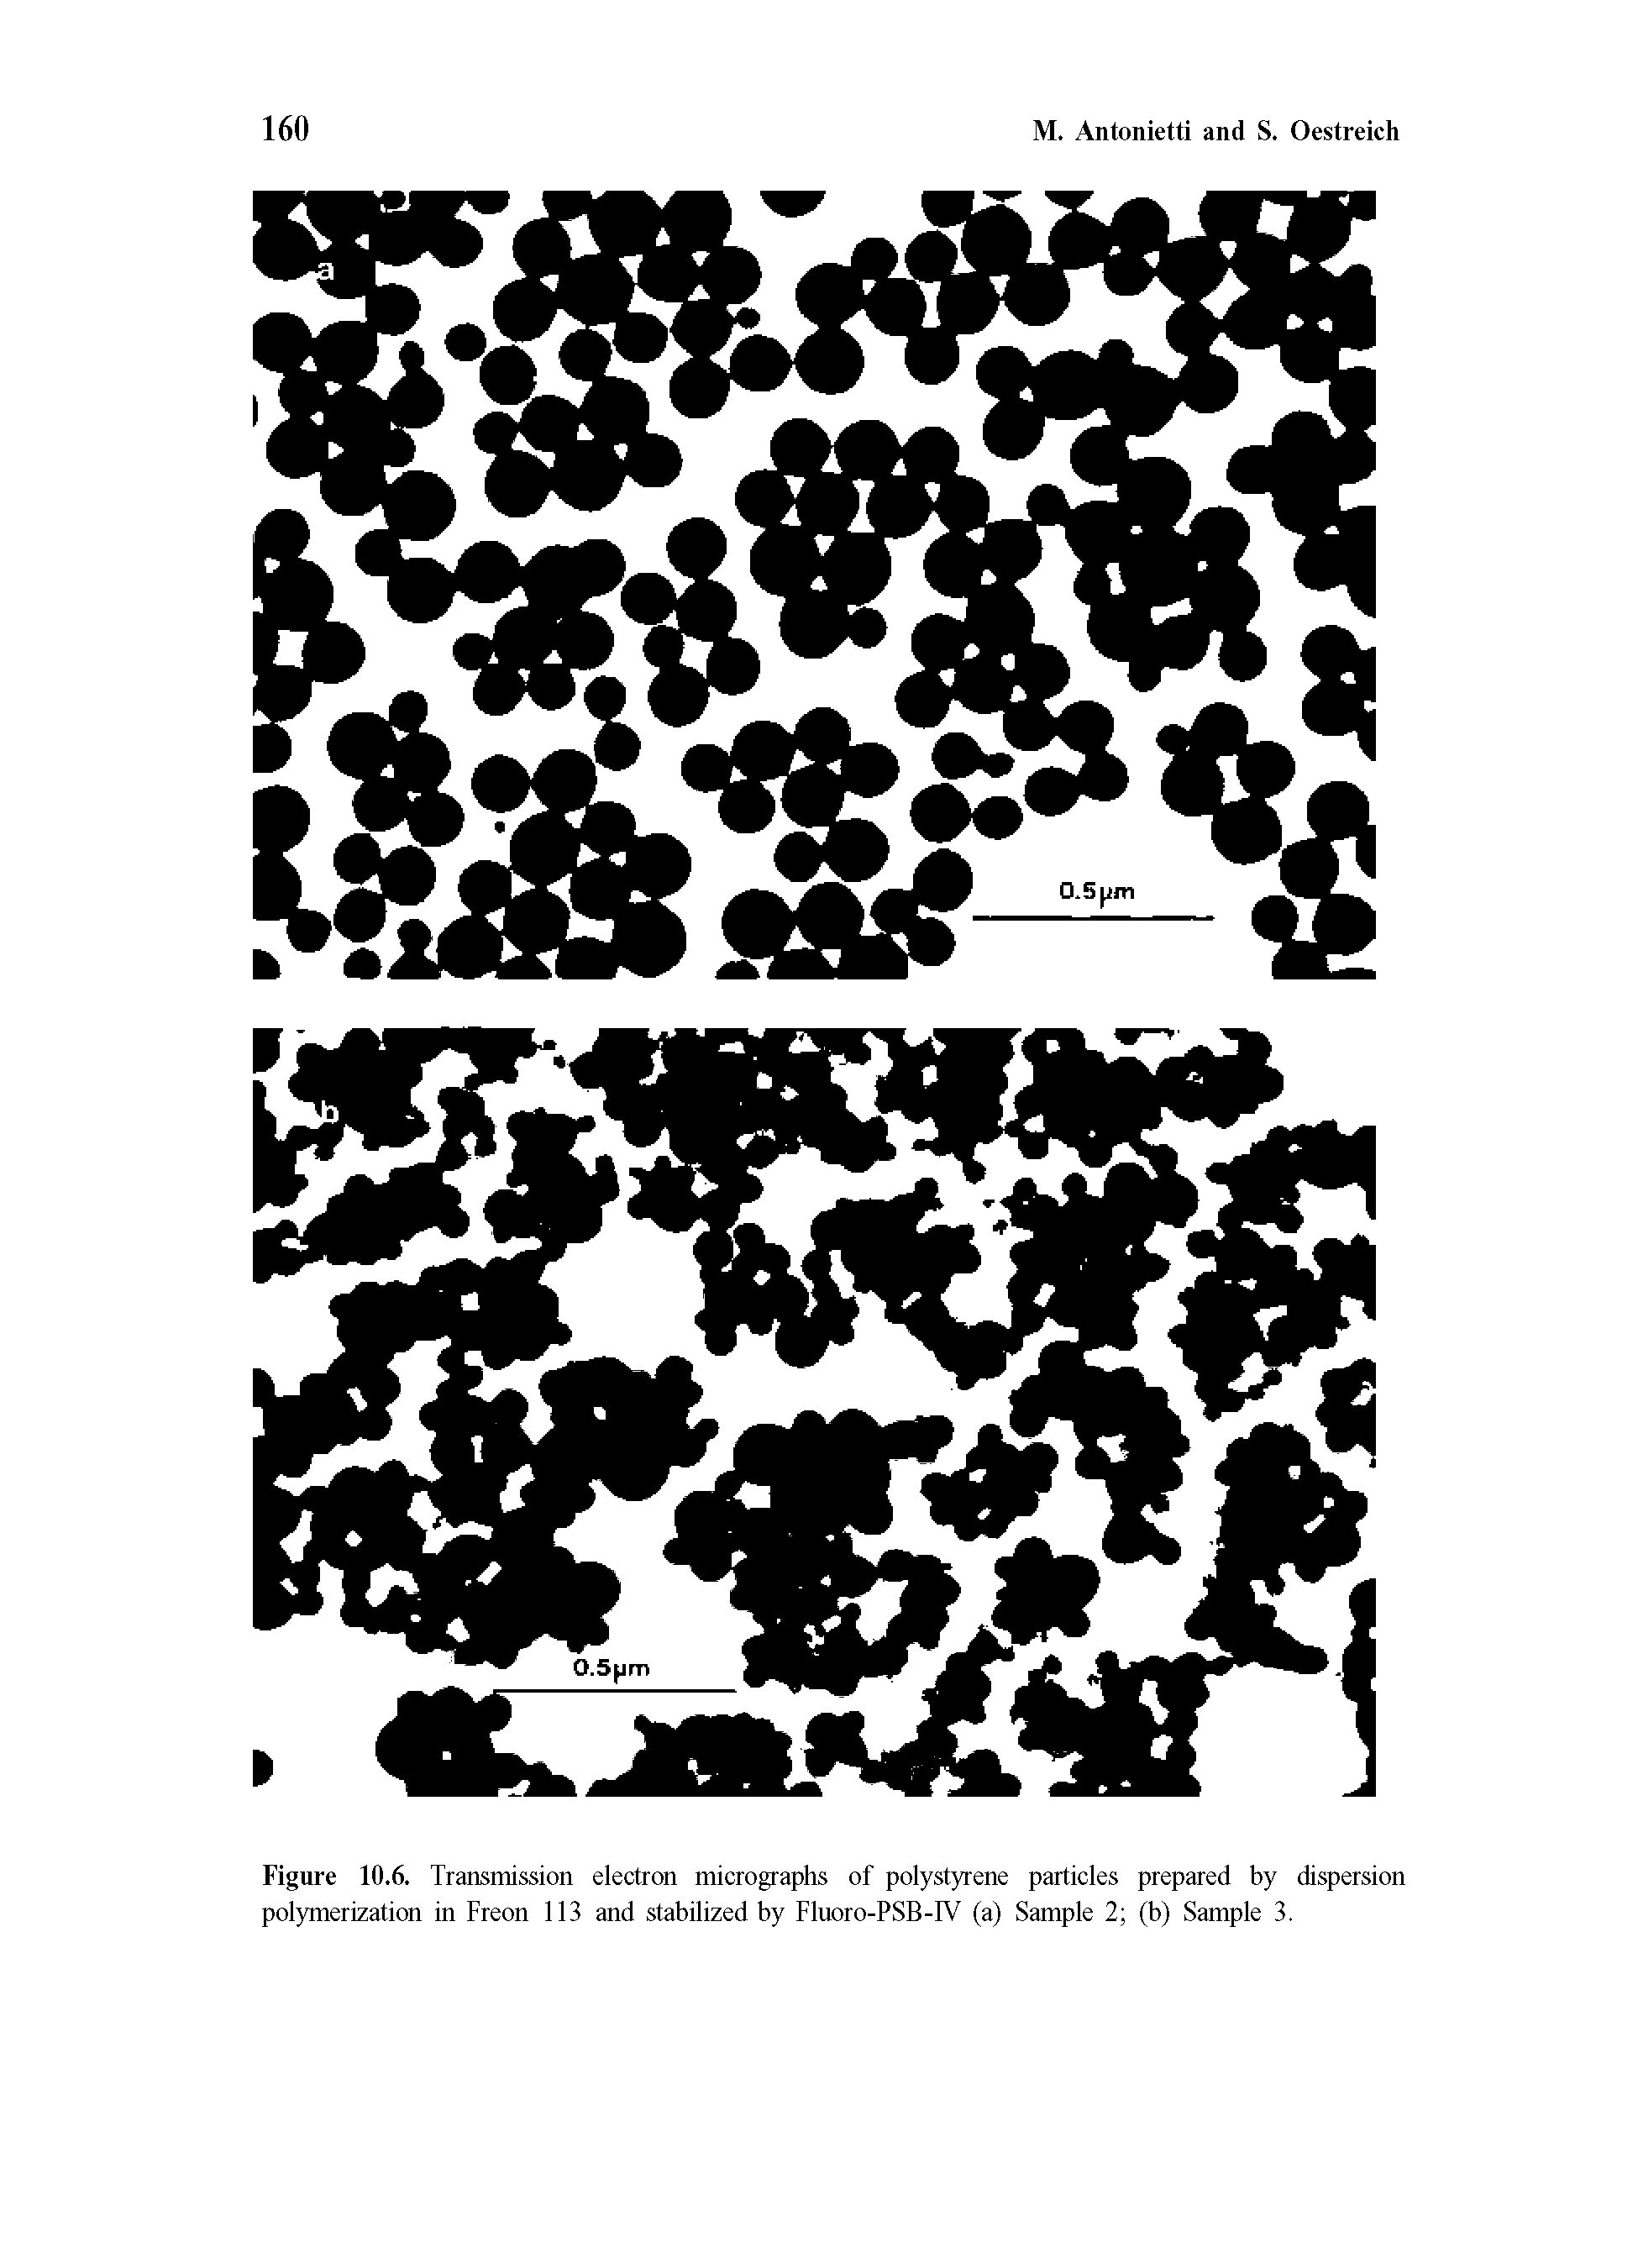 Figure 10.6. Transmission electron micrographs of polystyrene particles prepared by dispersion polymerization in Freon 113 and stabilized by Fluoro-PSB-IV (a) Sample 2 (b) Sample 3.